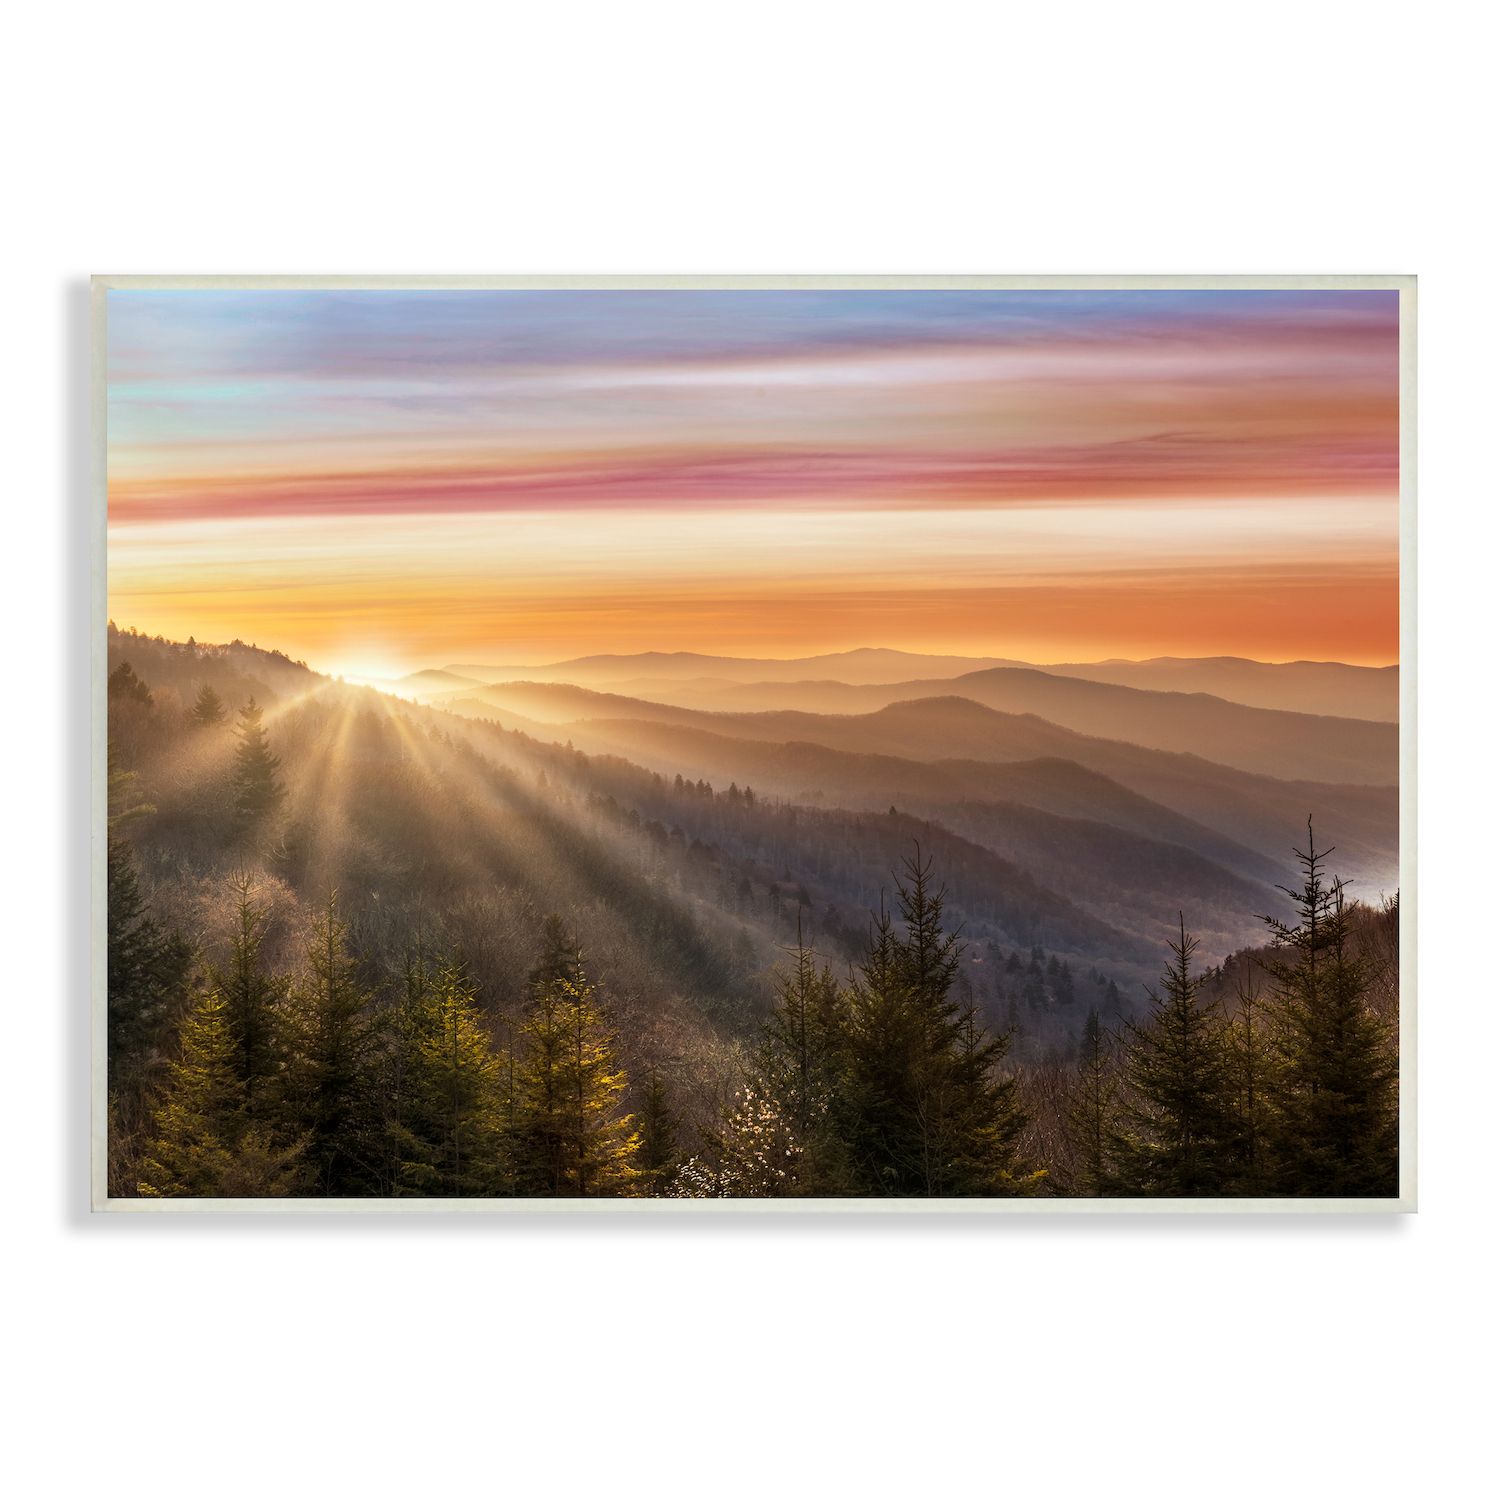 acrylic painting on an 11x14 canvas of a smoky mountain sunset